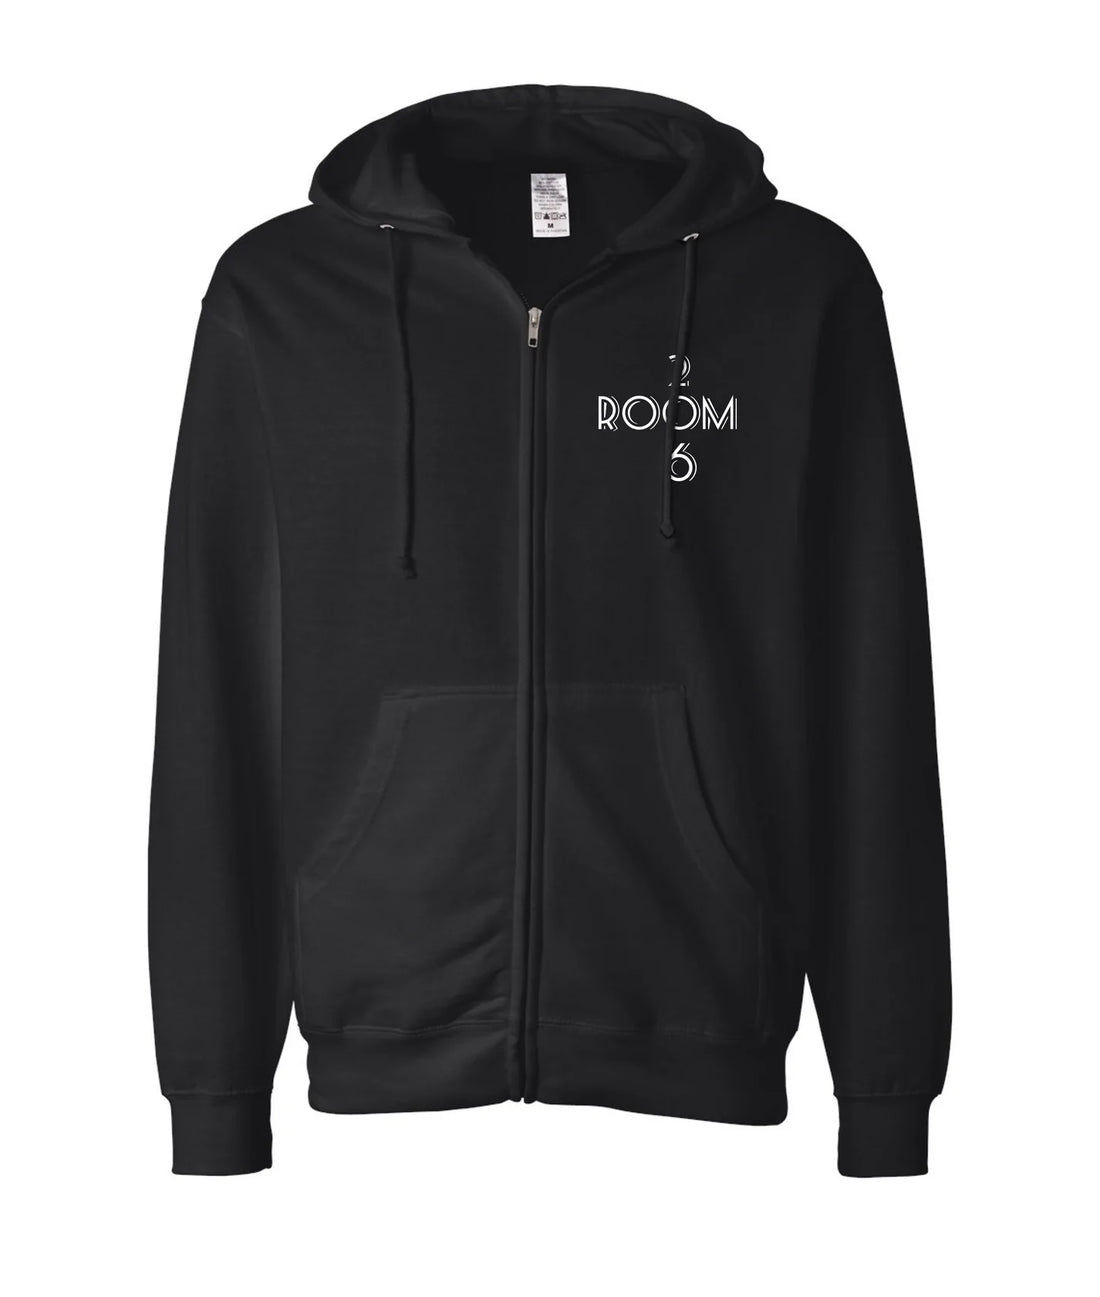 8 Ways to Market and Sell Band Hoodies?